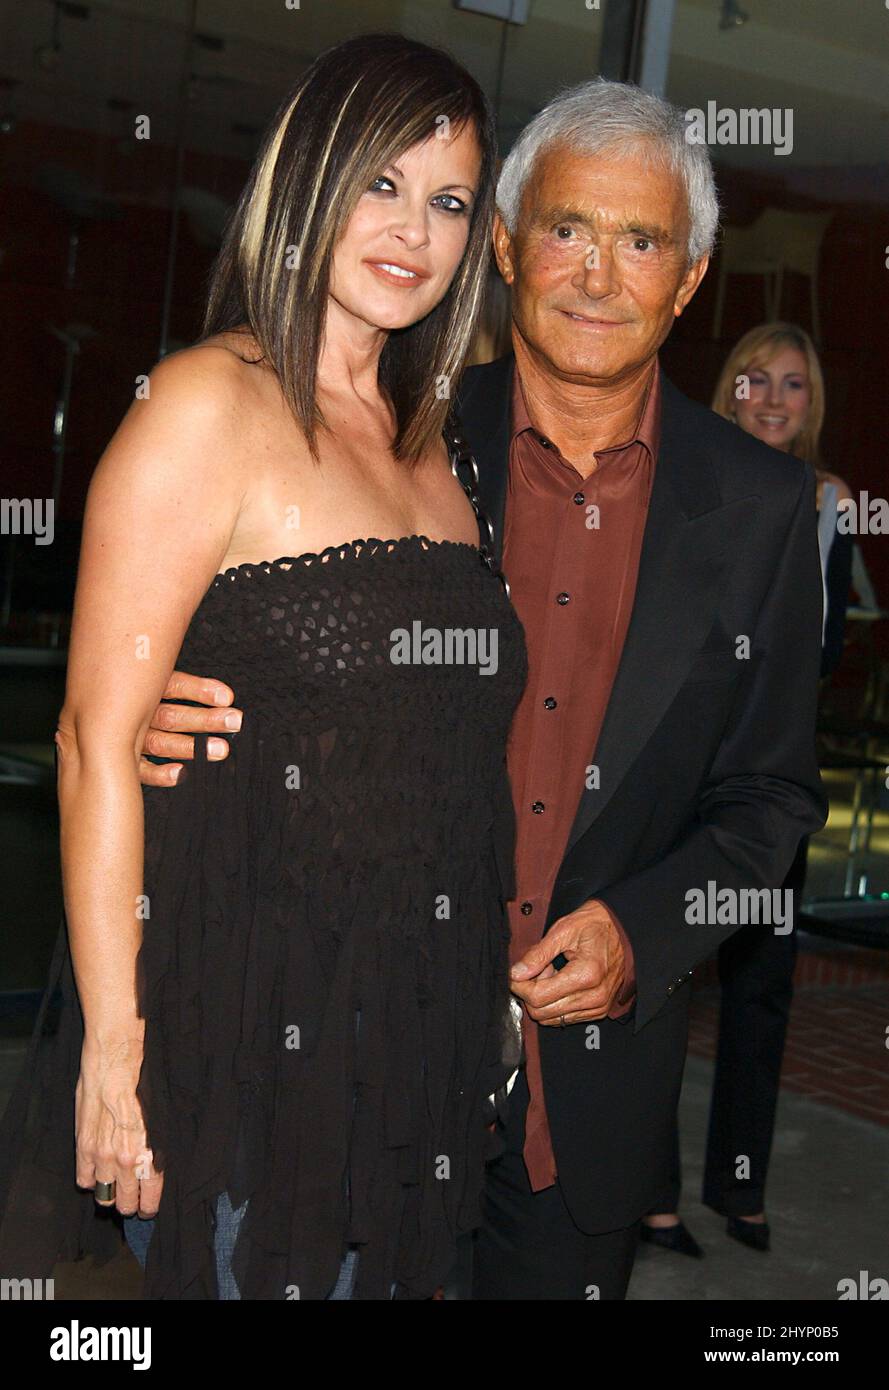 VIDAL SASSOON & WIFE RONNIE ATTEND THE STELLA McCARTNEY STORE OPENING ON BEVERLY BLVD, WEST HOLLYWOOD. PICTURE: UK PRESS Stock Photo